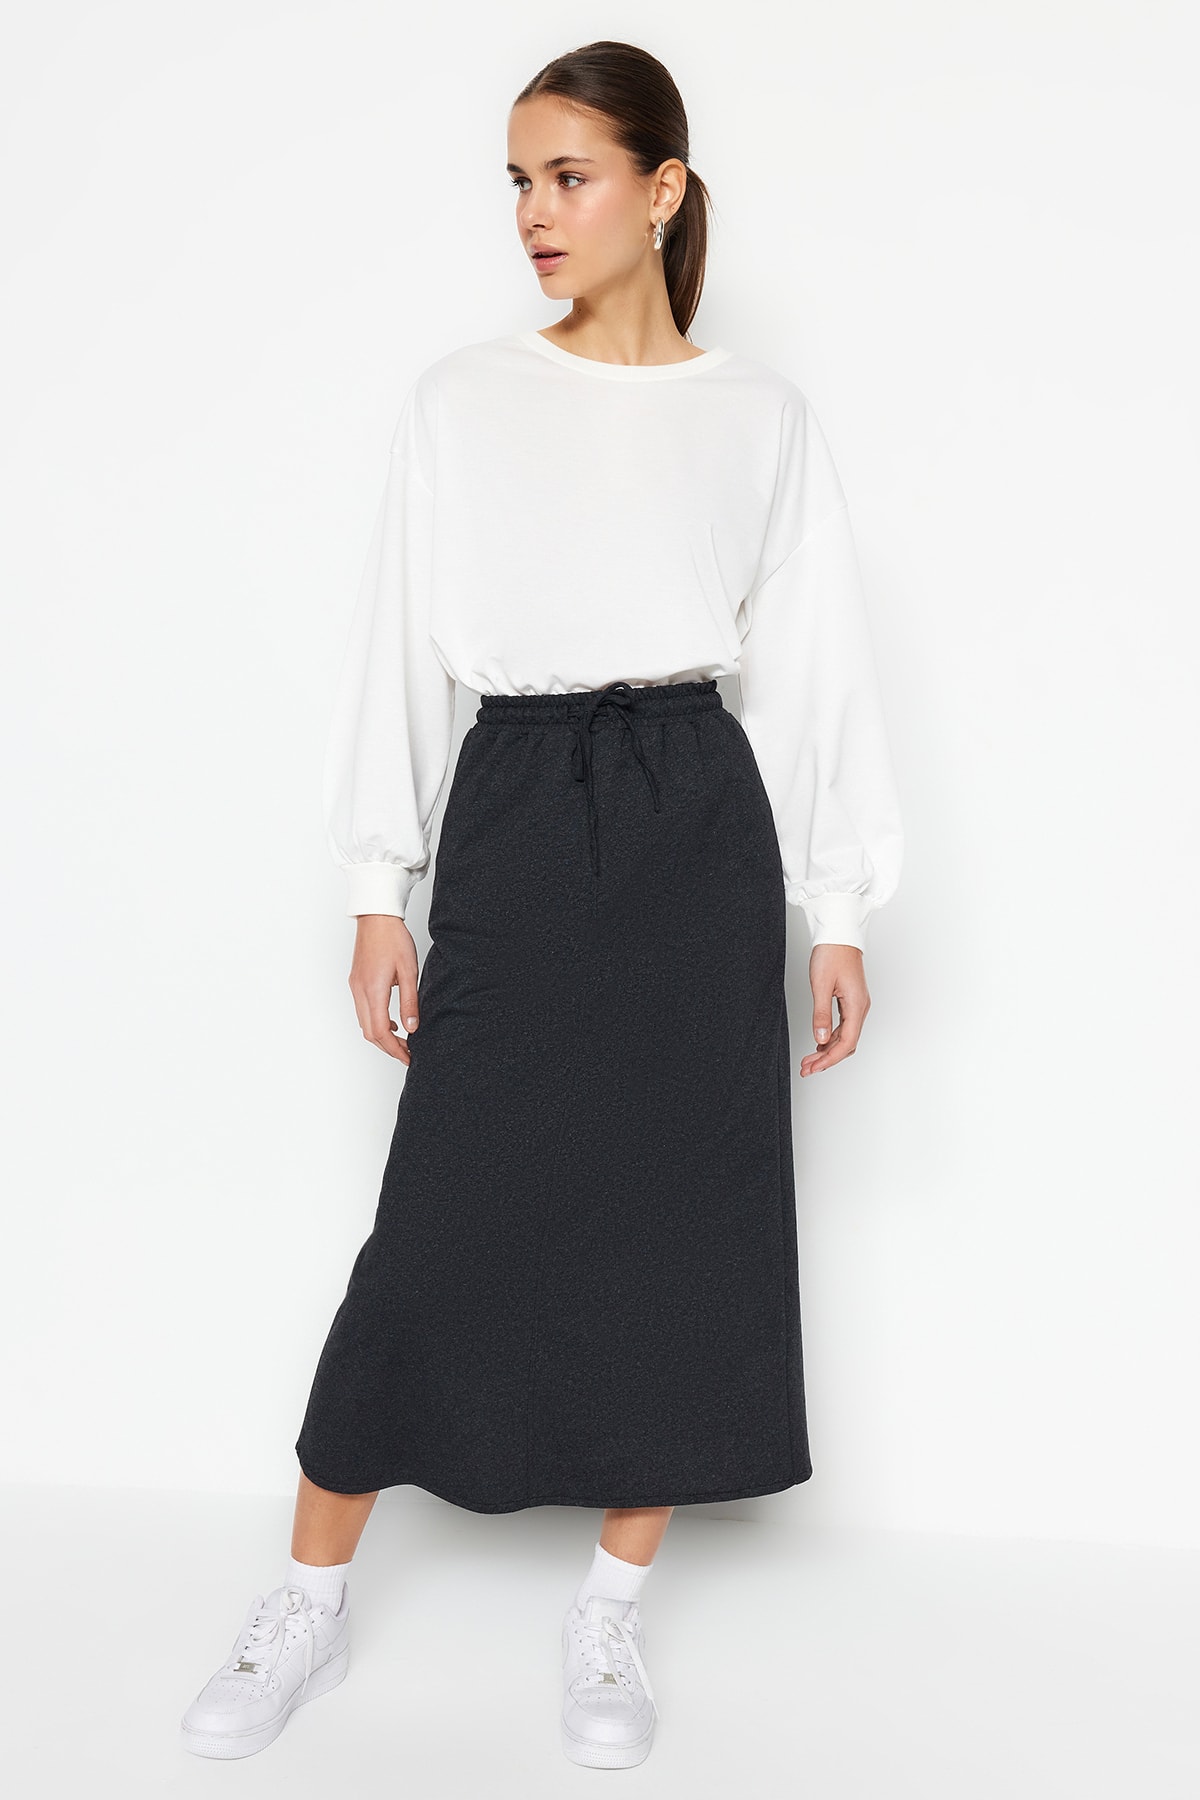 Trendyol Anthracite Knitted Skirt with Stitching Detail in the Front and Elastic Waist